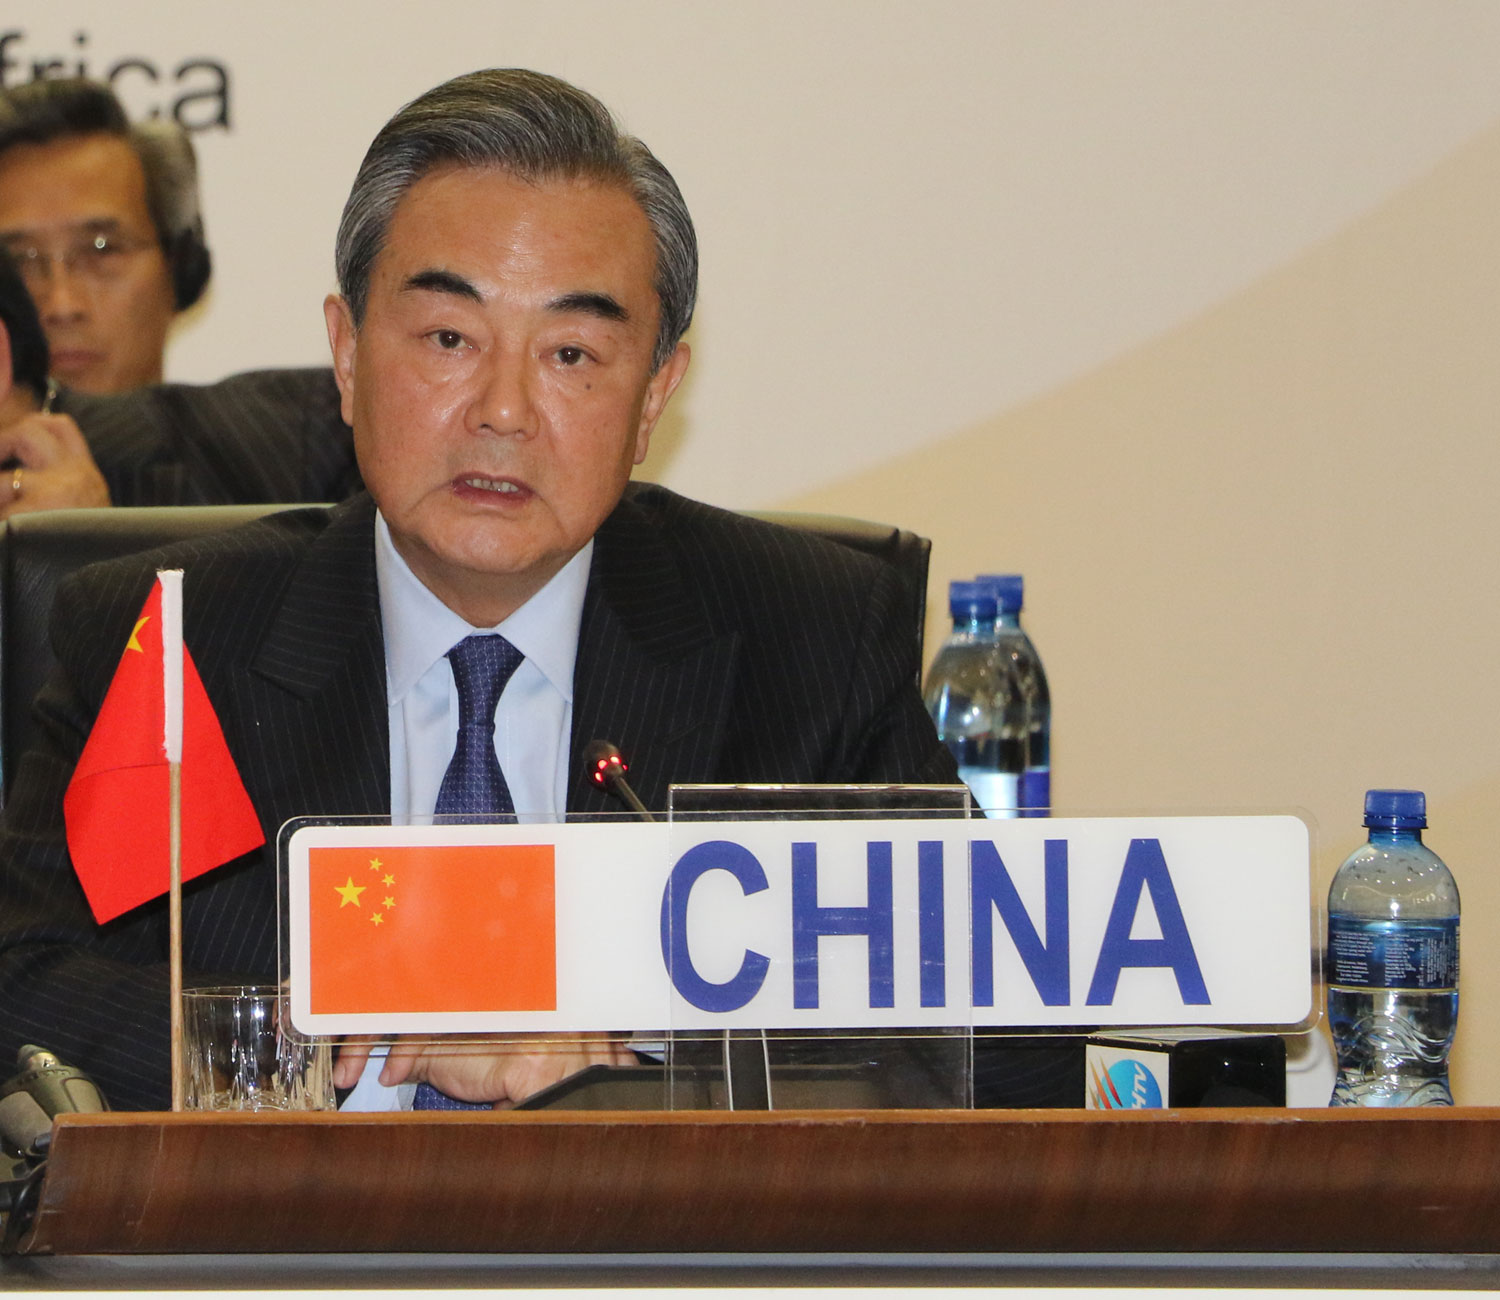 Chinese State Councilor and Foreign Minister Wang Yi speaks at the Formal Meeting of the BRICS Ministers of Foreign Affairs held in Pretoria, South Africa, on Monday, June 4, 2018. [Photo: China Plus/Gao Junya]